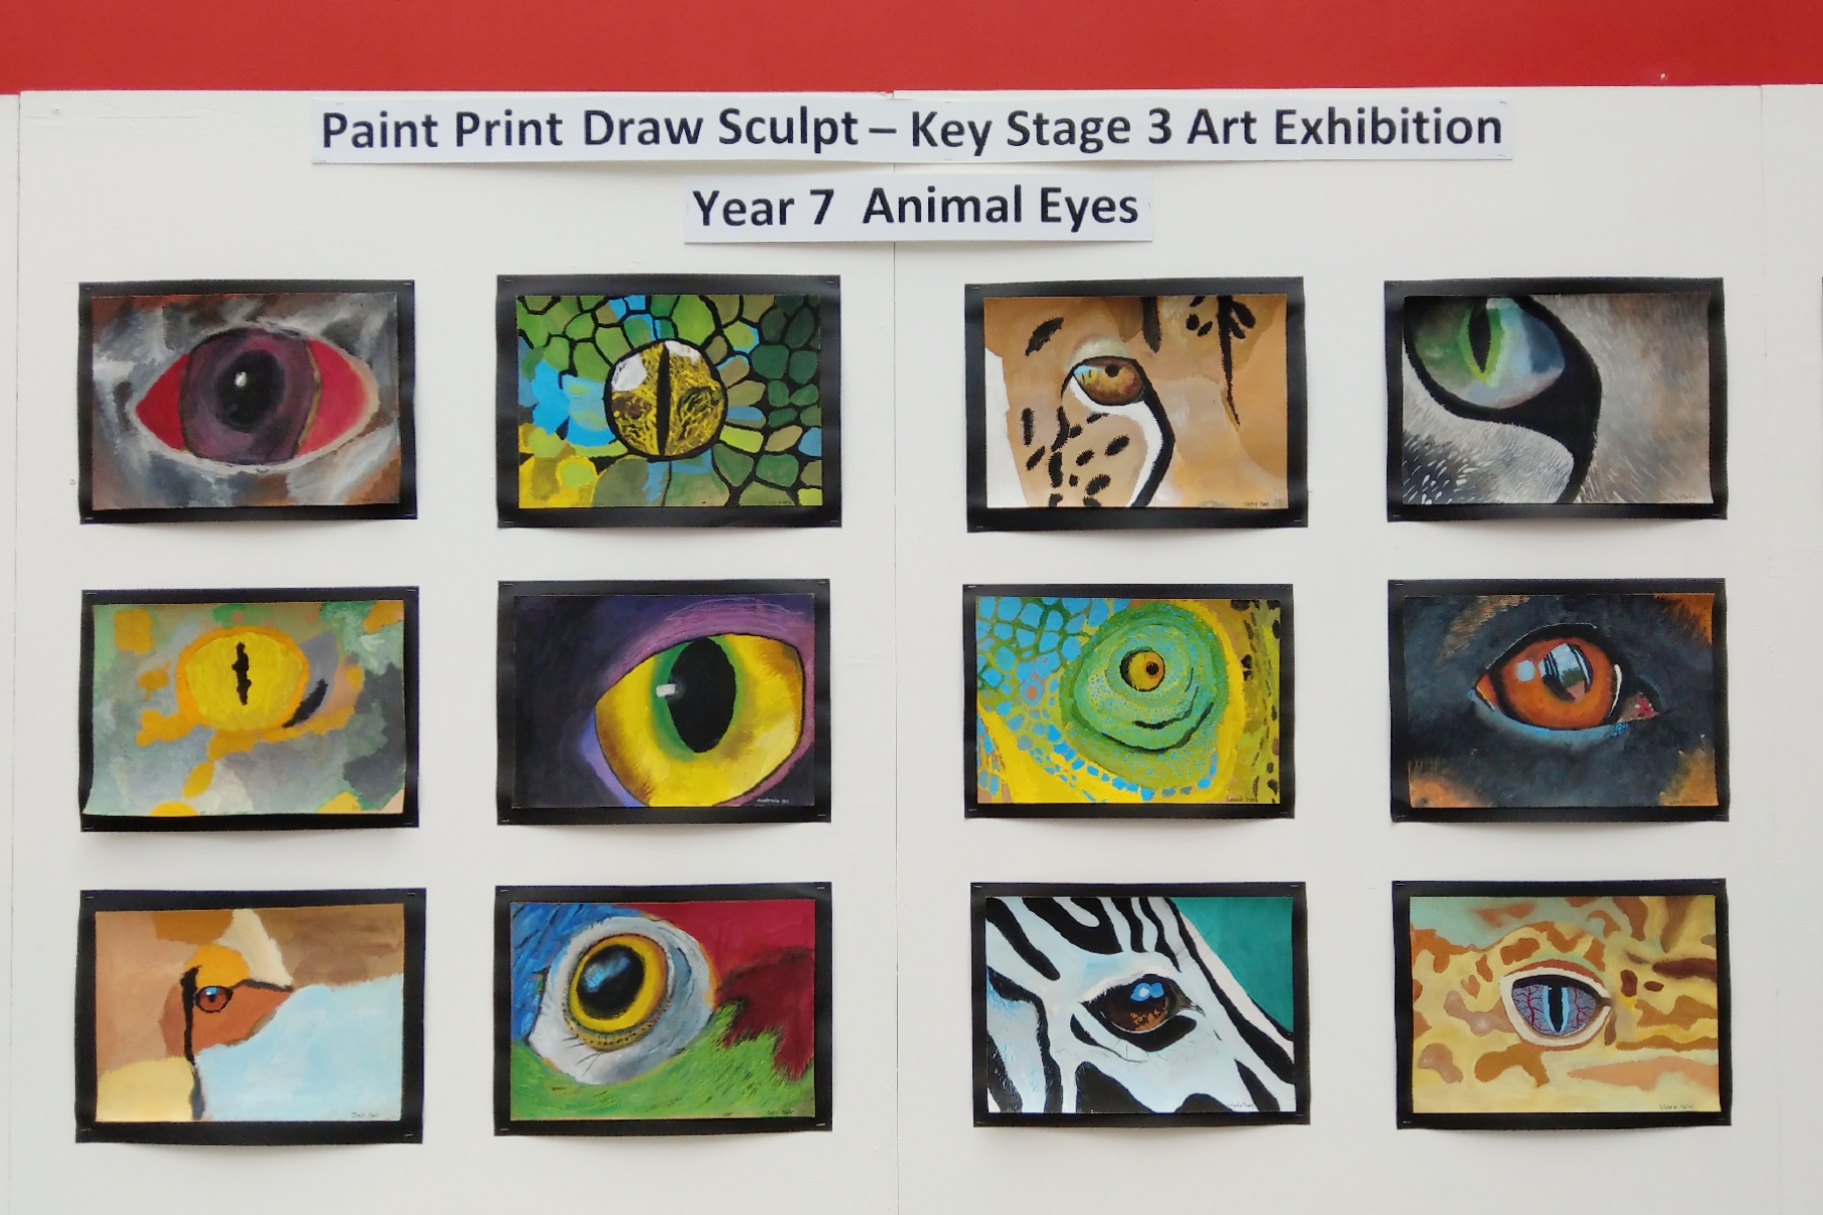 DCB Key Stage 3 exhibition ''Paint Print Draw Sculpt'' - Year 7 Animal Eyes